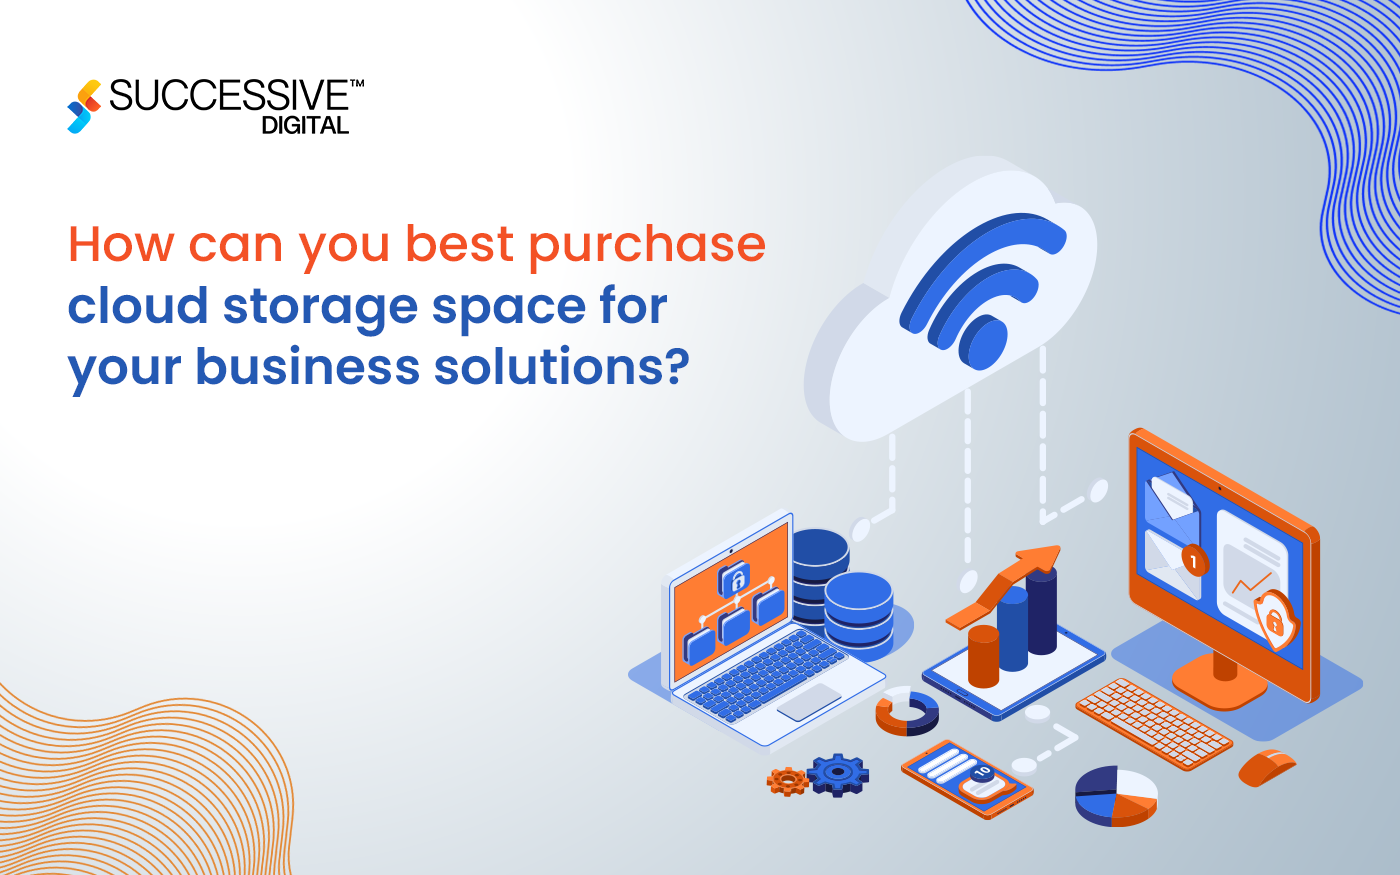 How can you best purchase cloud storage space for your business solutions?